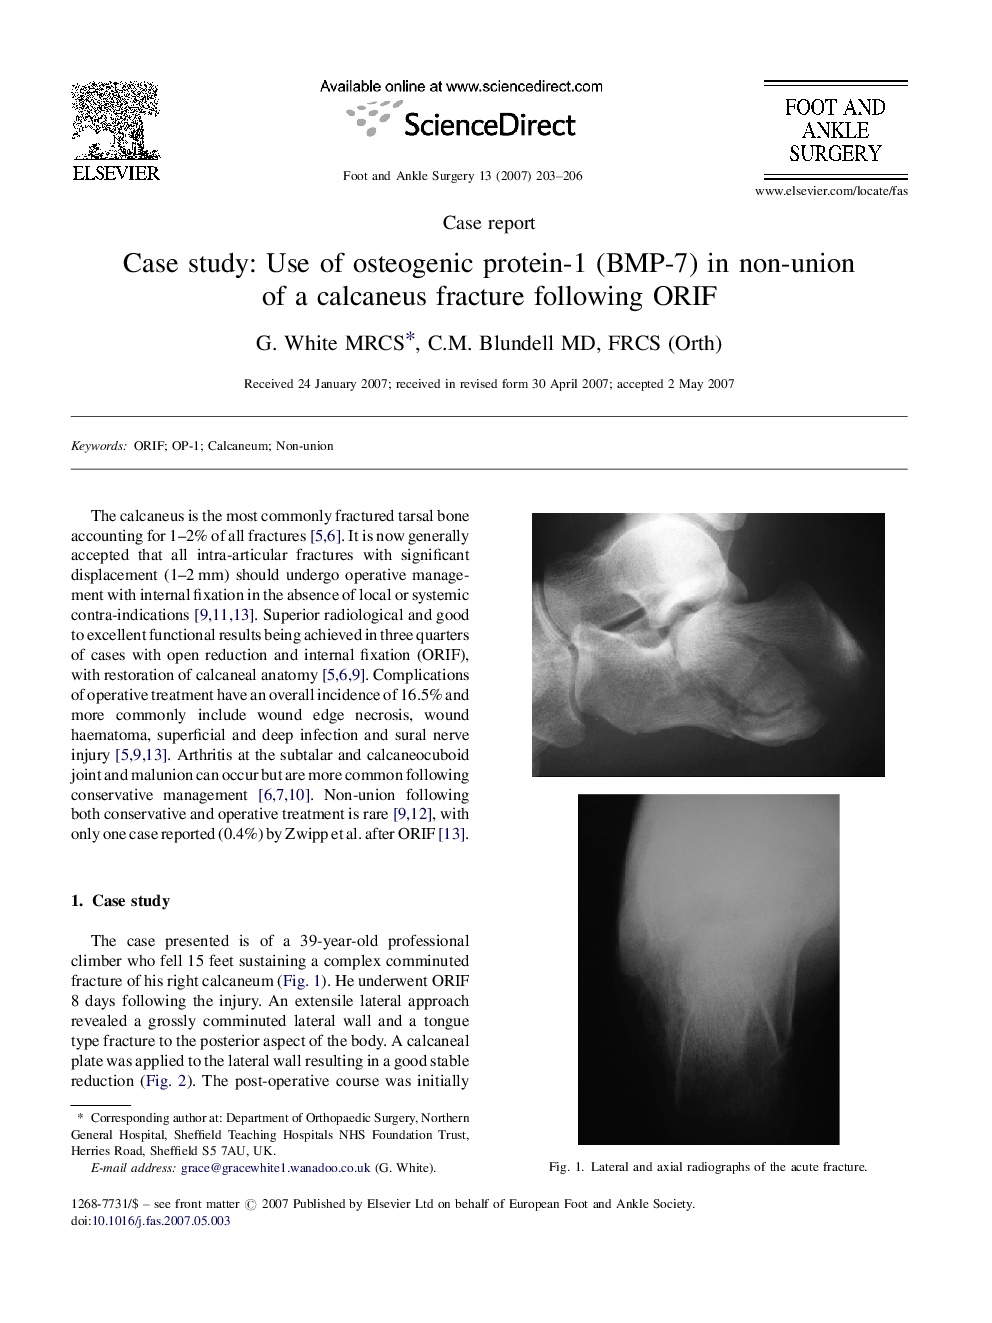 Case study: Use of osteogenic protein-1 (BMP-7) in non-union of a calcaneus fracture following ORIF